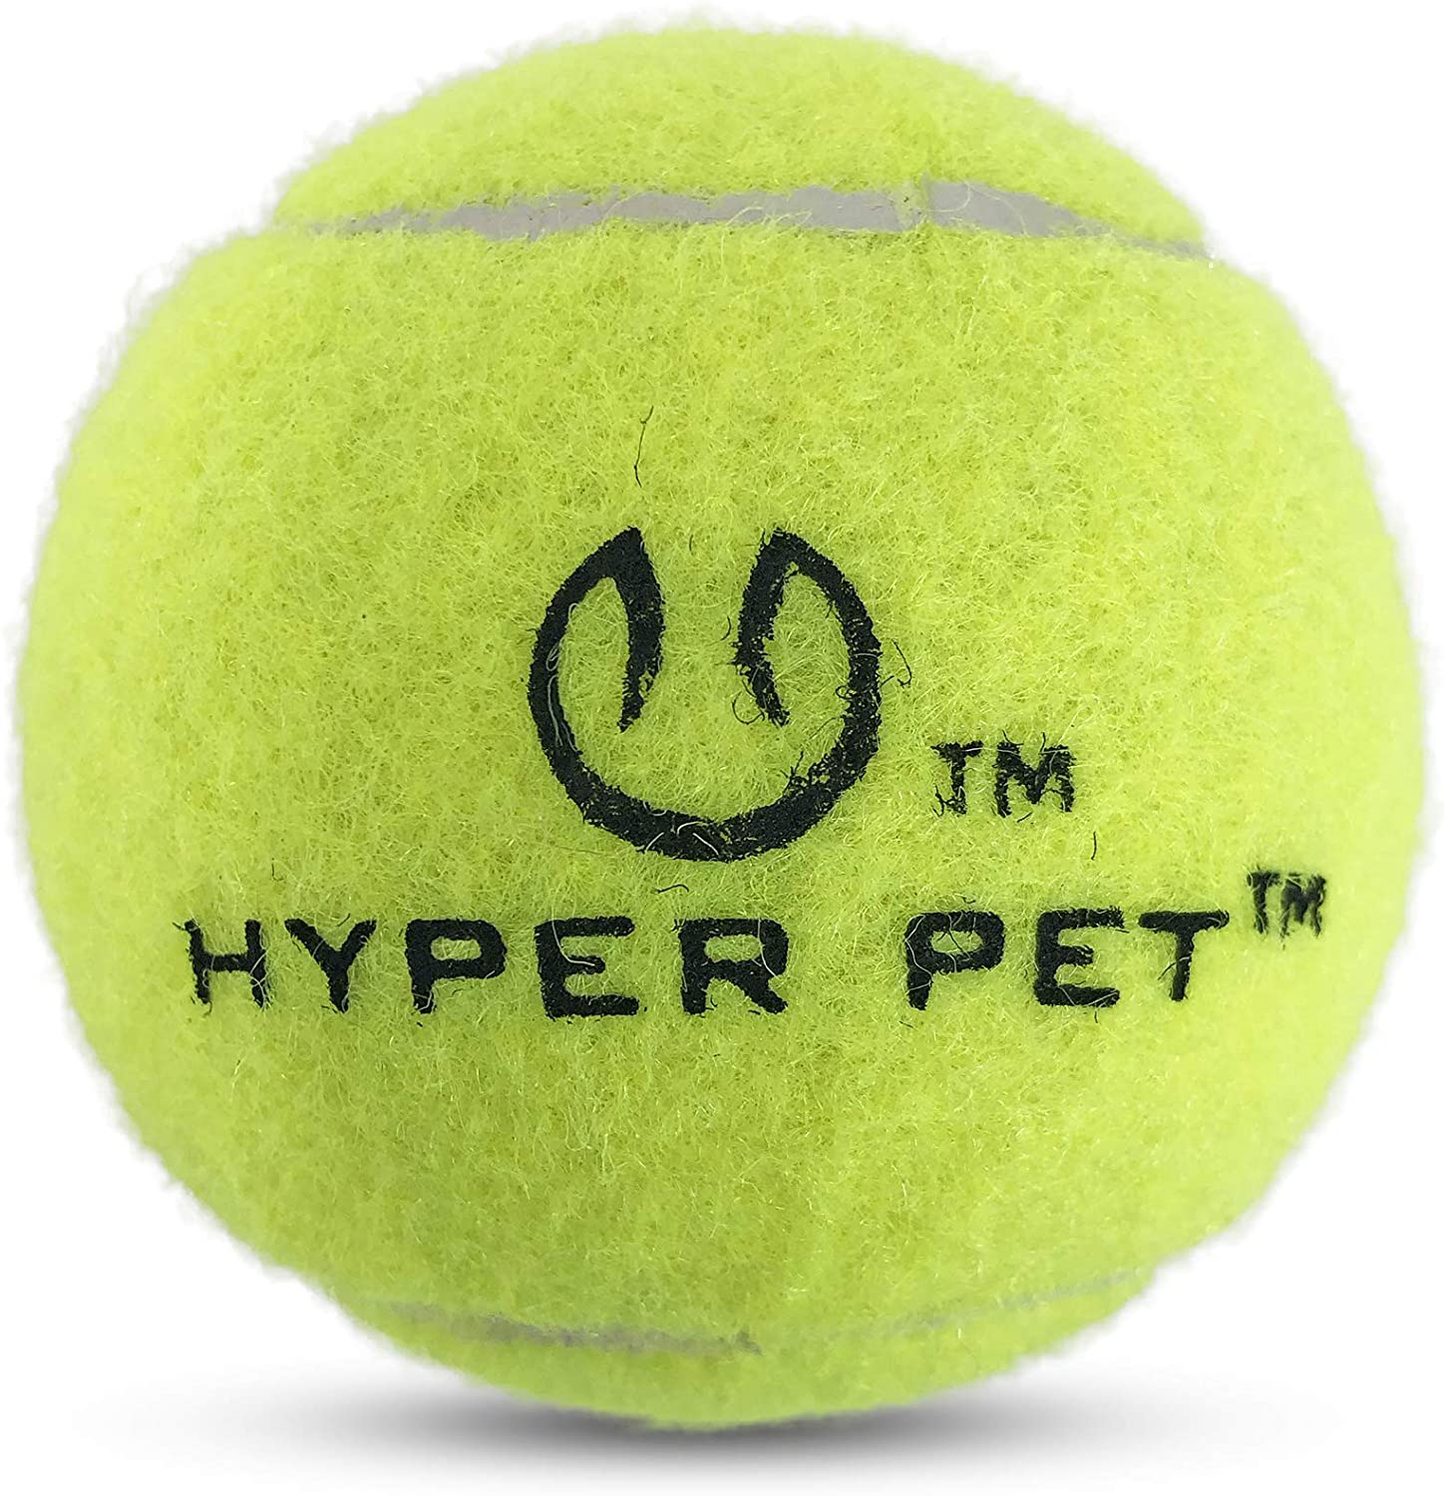 Hyper Pet Tennis Balls for Dogs (Dog Ball Dog Toys for Exercise, Hyper Pet K9 Kannon K2 & Hyper Pet Ball Launcher) Interactive Dog Toys for Large Dogs, Medium Dogs & Small Dogs - 2 Size Options Animals & Pet Supplies > Pet Supplies > Dog Supplies > Dog Toys Hyper Pet   